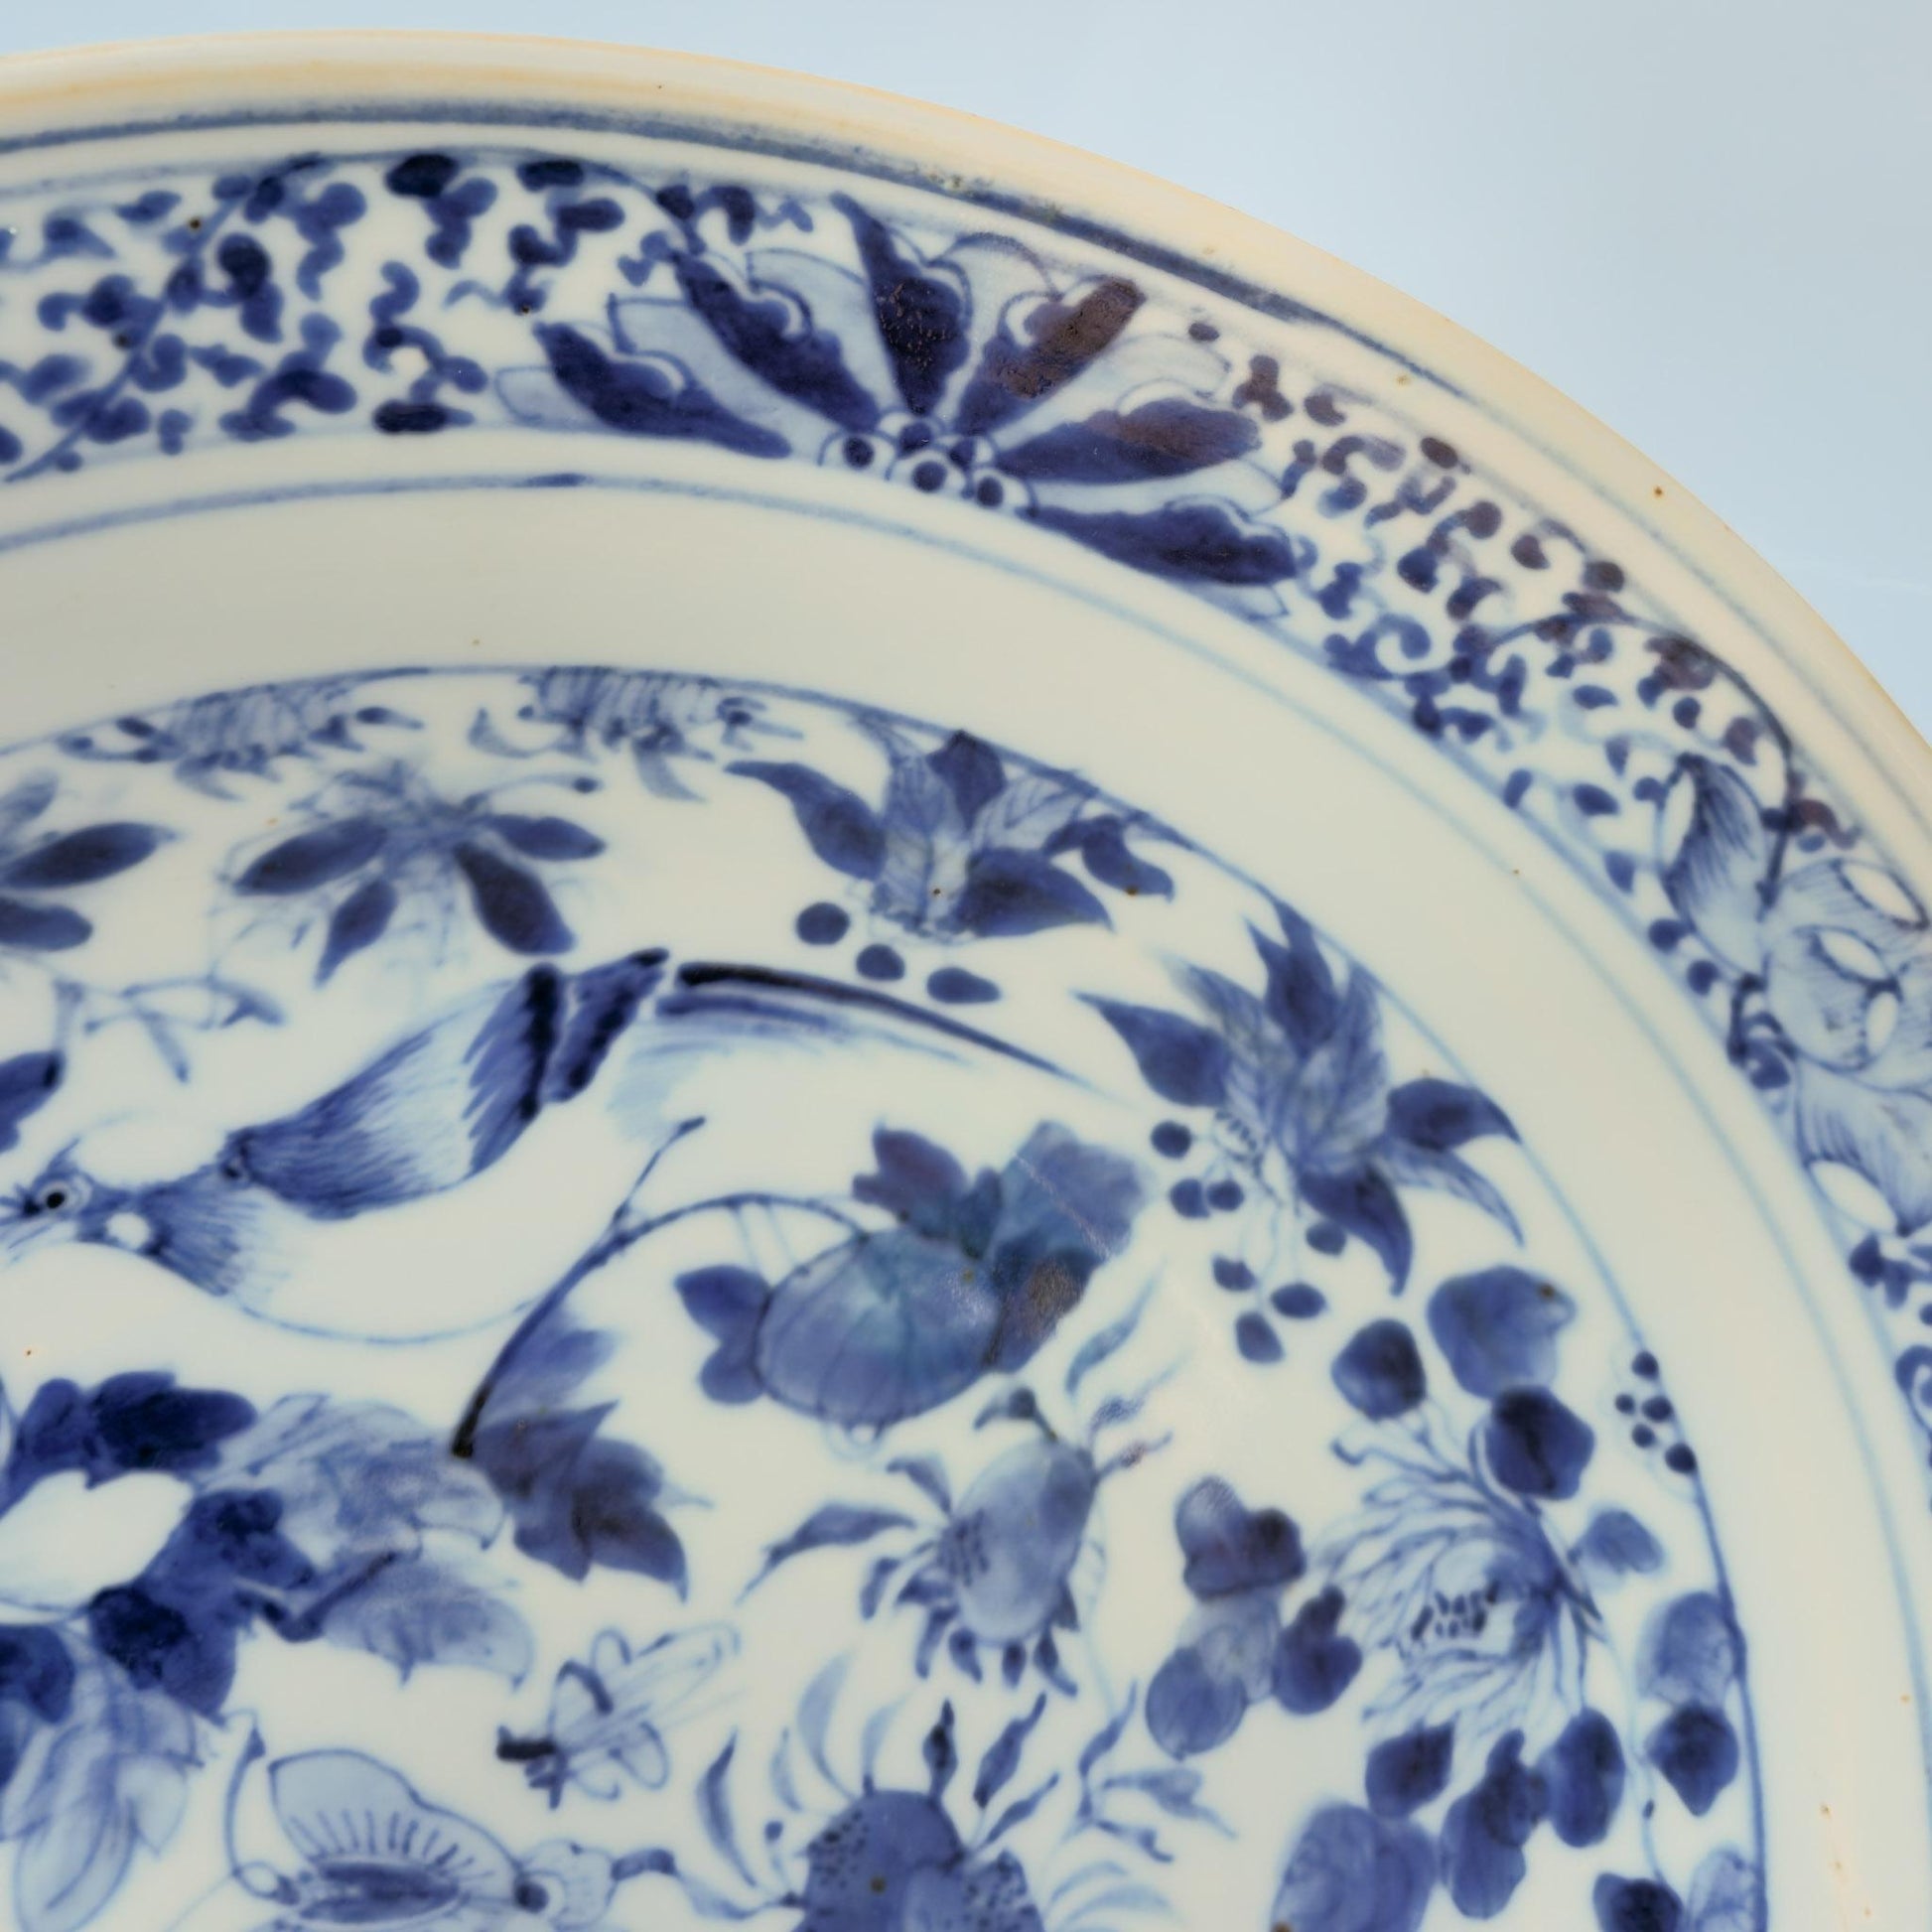 Chinese 19thC. Blue and White Birds and Flowers Garden Scene Porcelain Charger / Dish Qing Mollaris.com 